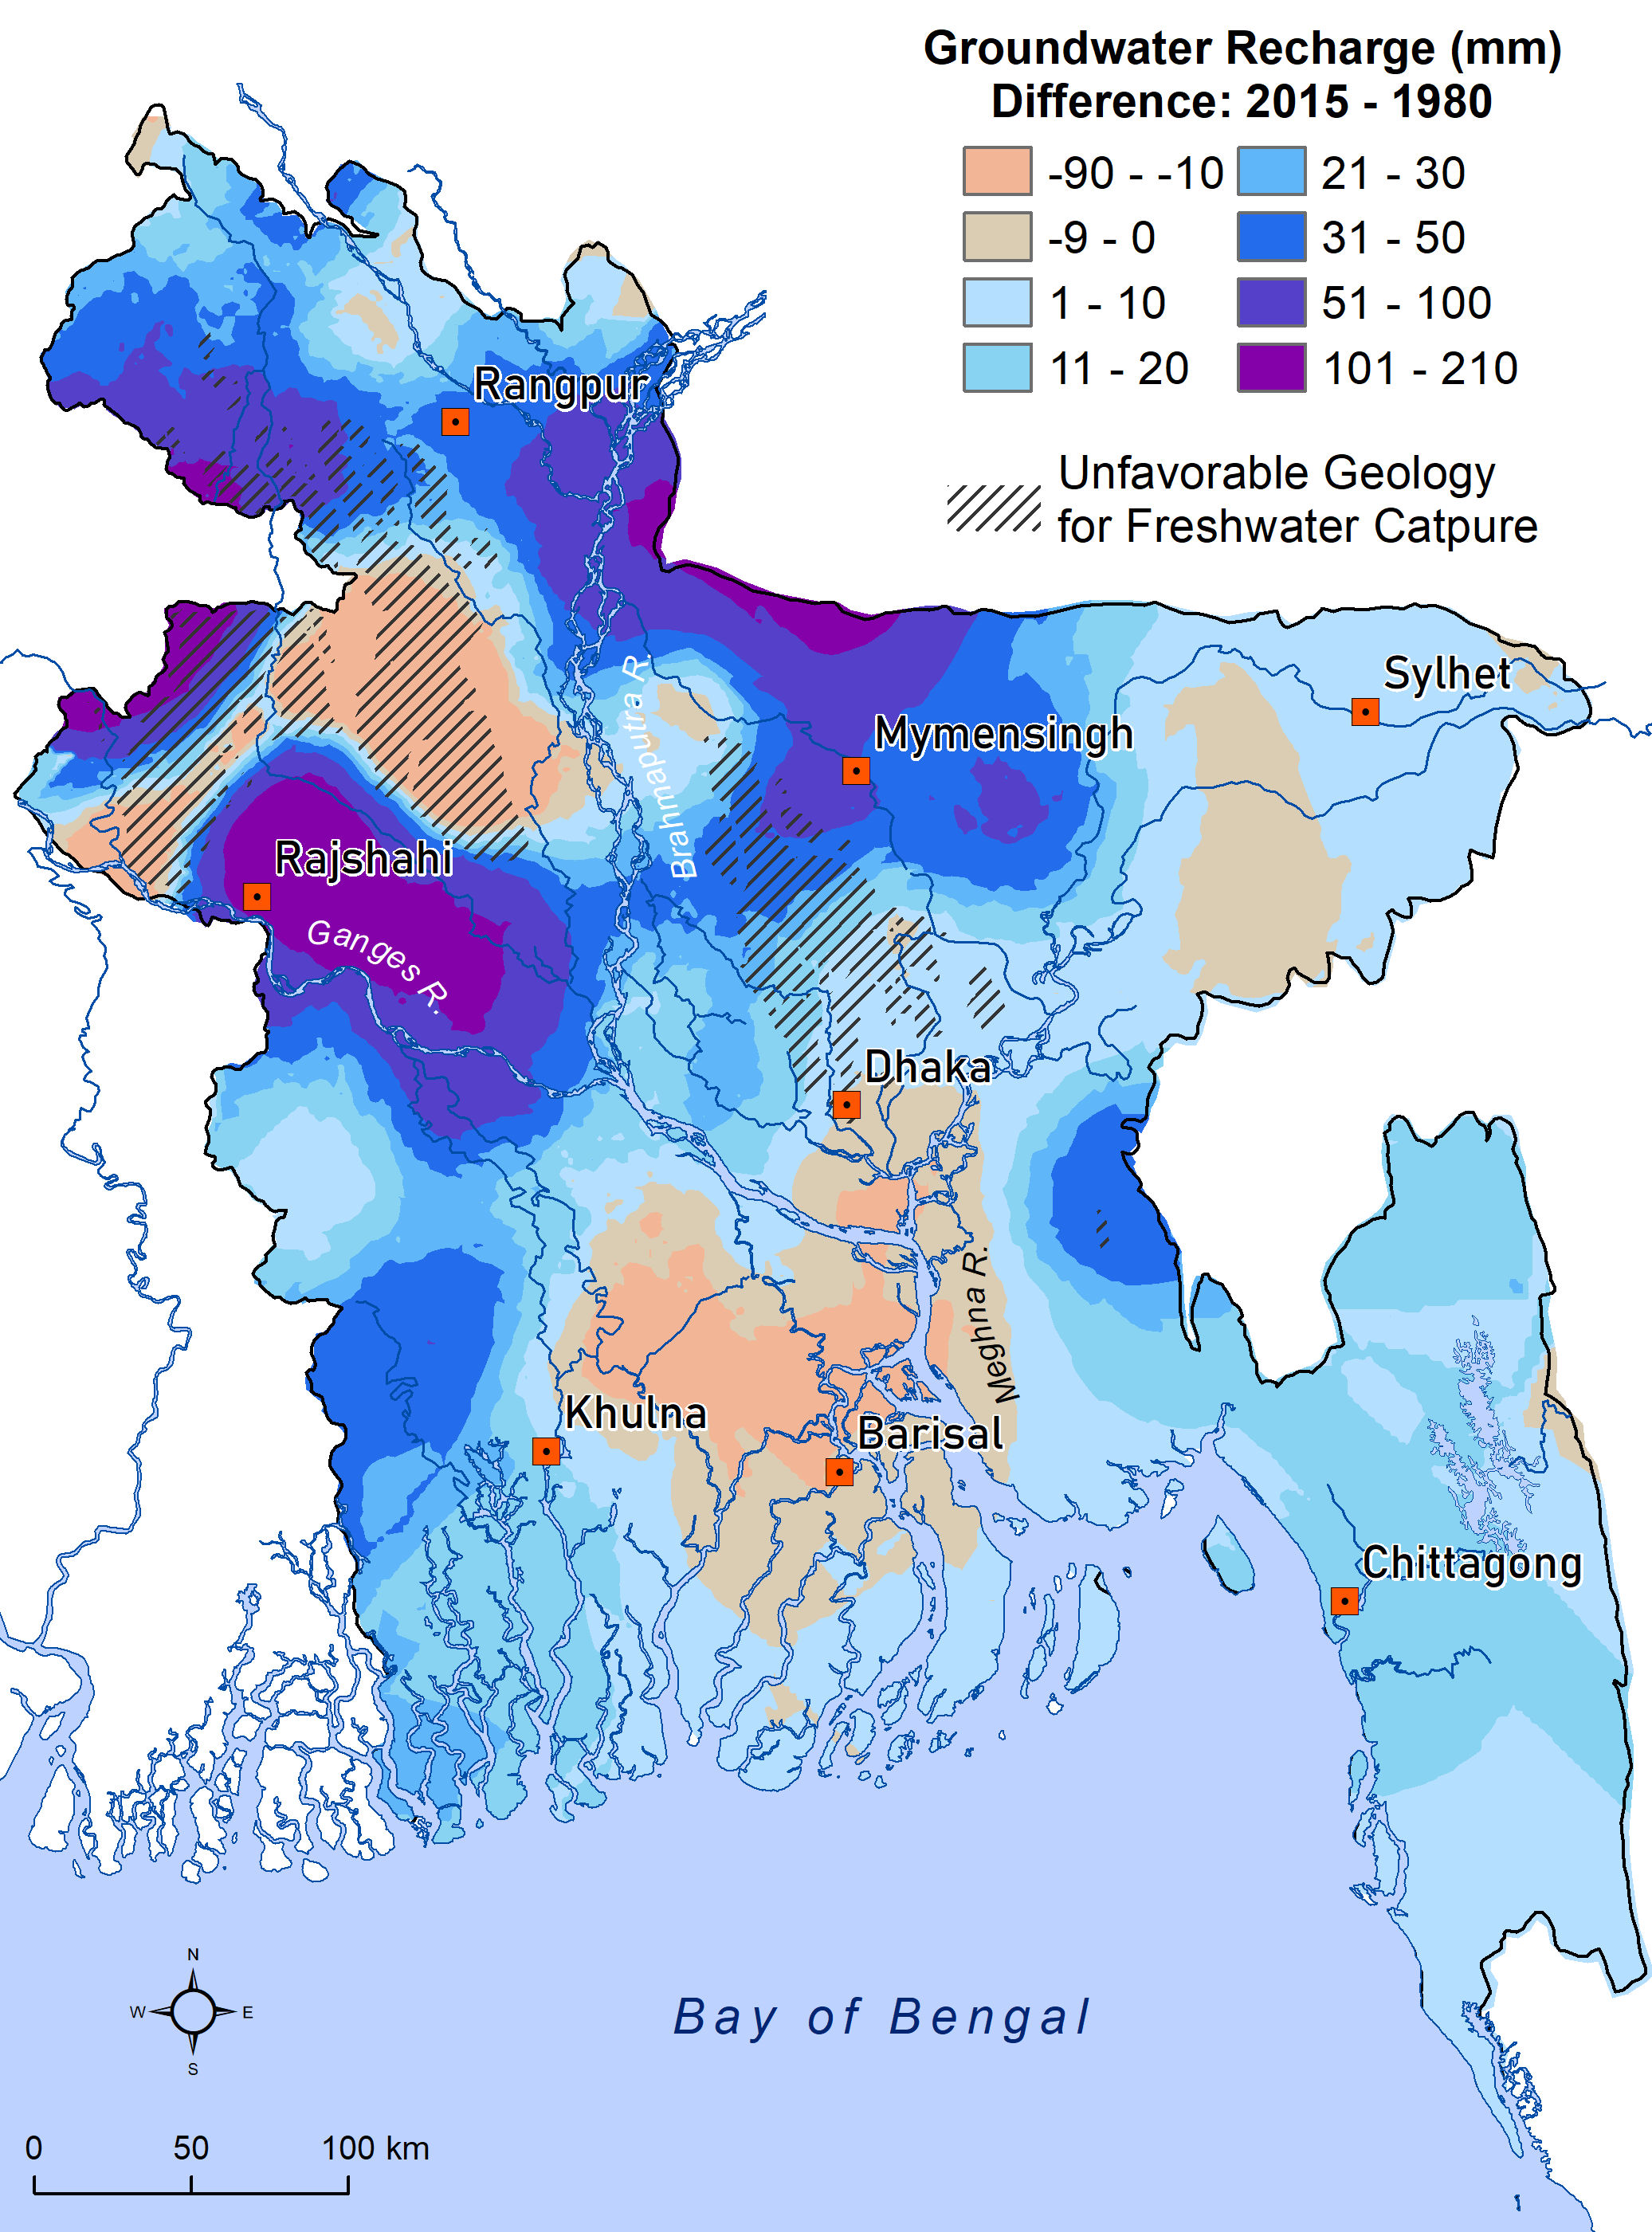 a map of bangladesh, using lighter and darker colors to indicate amount of groundwater recharge accumulation from 1980-2015. the city of rajshahi captured the most, while barisal captured the least